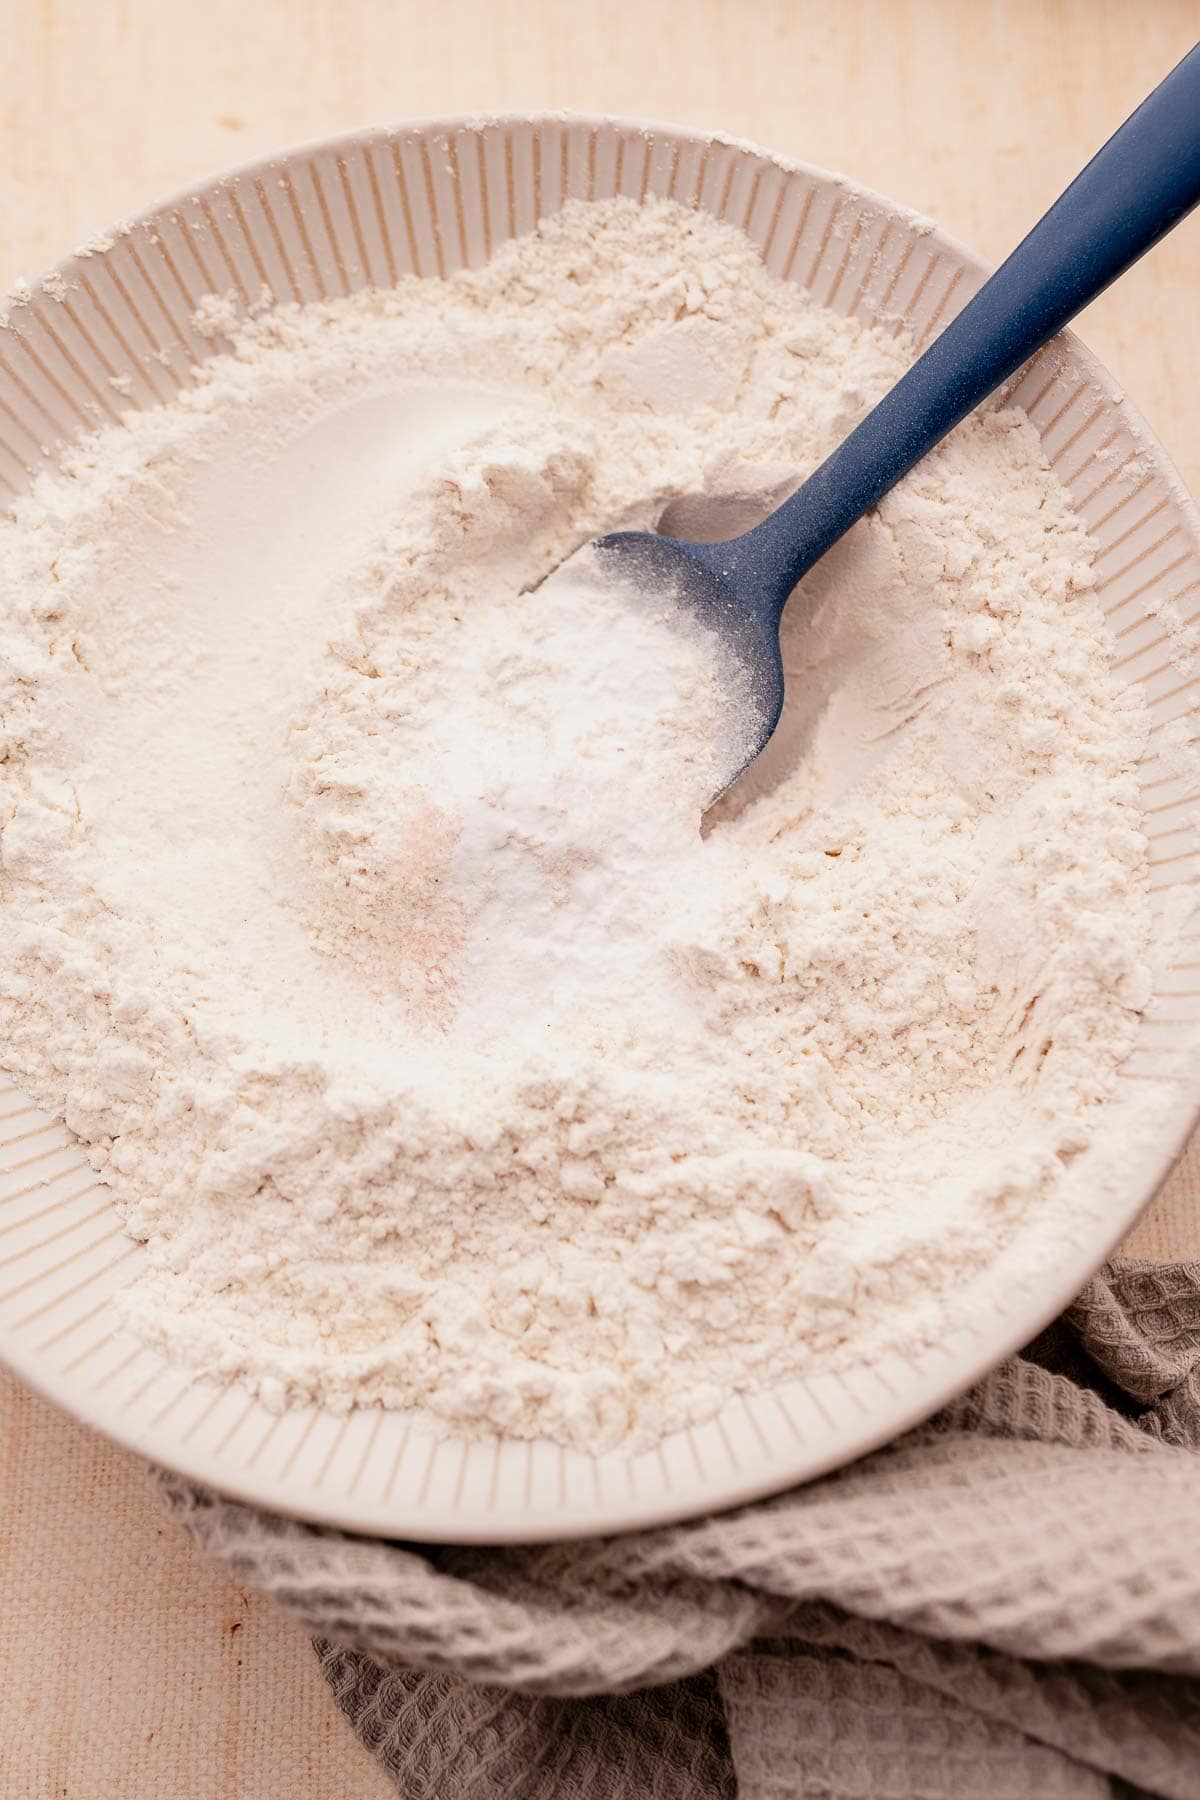 A gluten-free bowl of flour with a spoon.